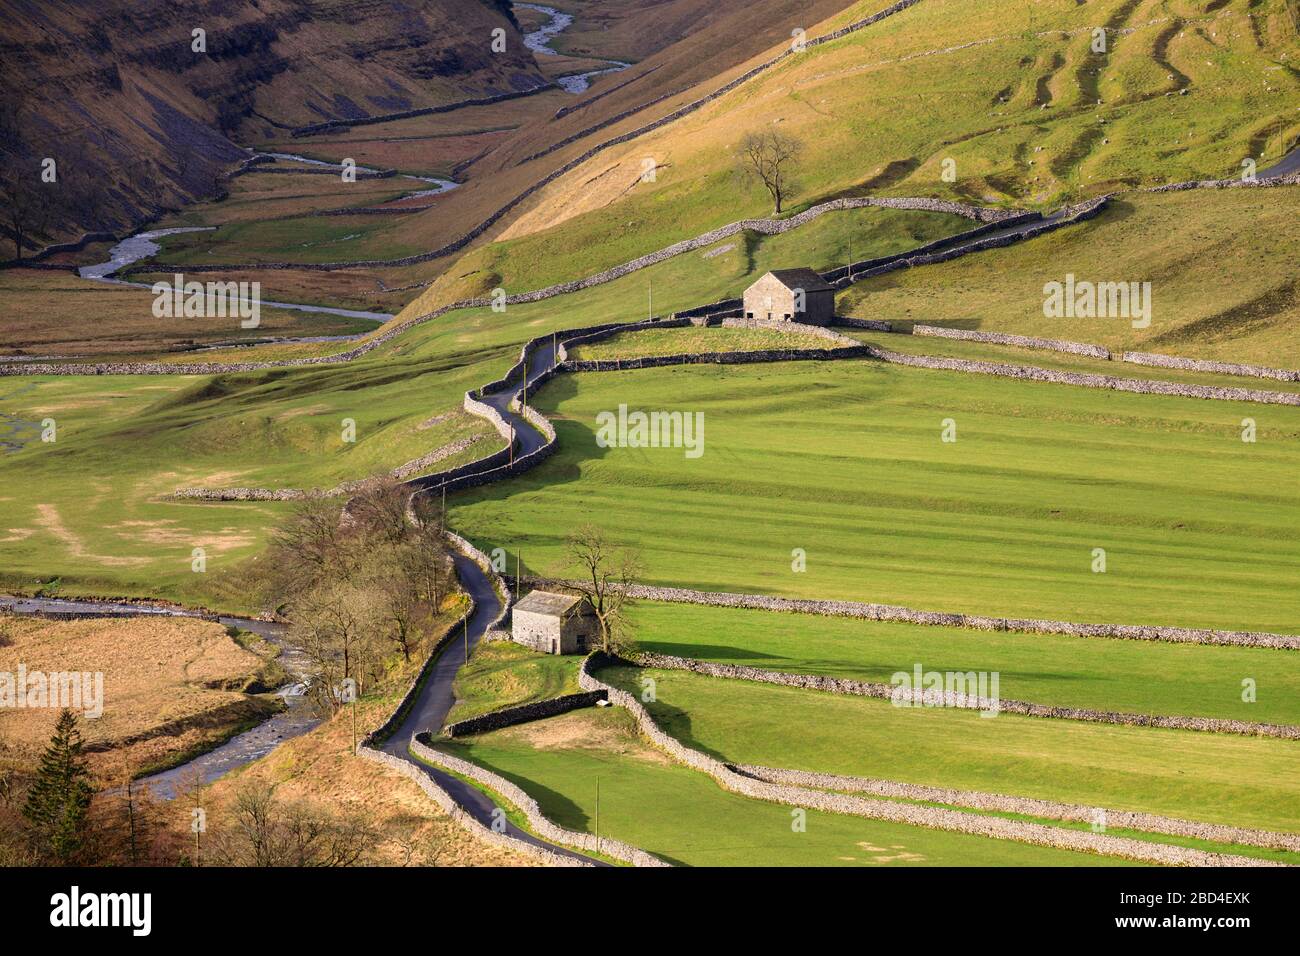 Brootes Lane at Arncliffe in the Yorkshire Dales National Park Stock Photo